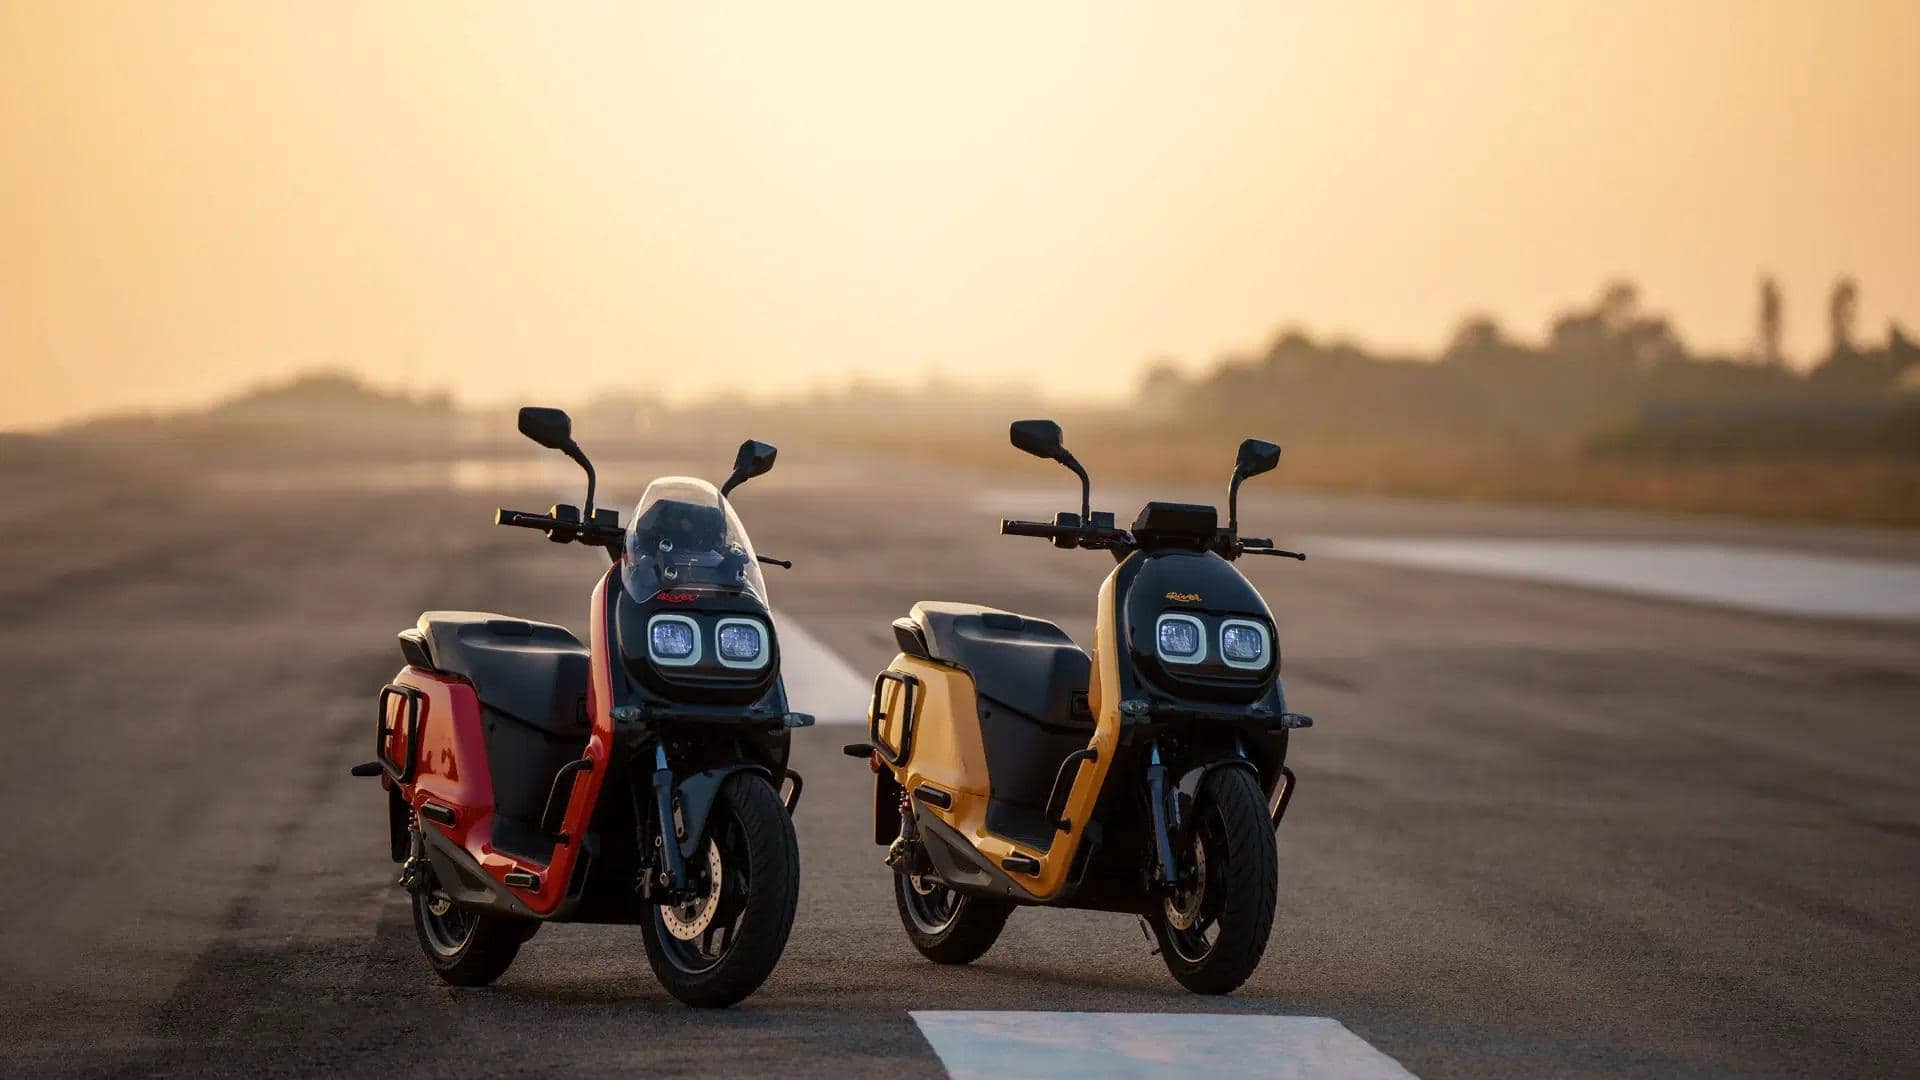 Need large storage space on your scooter? Check best options